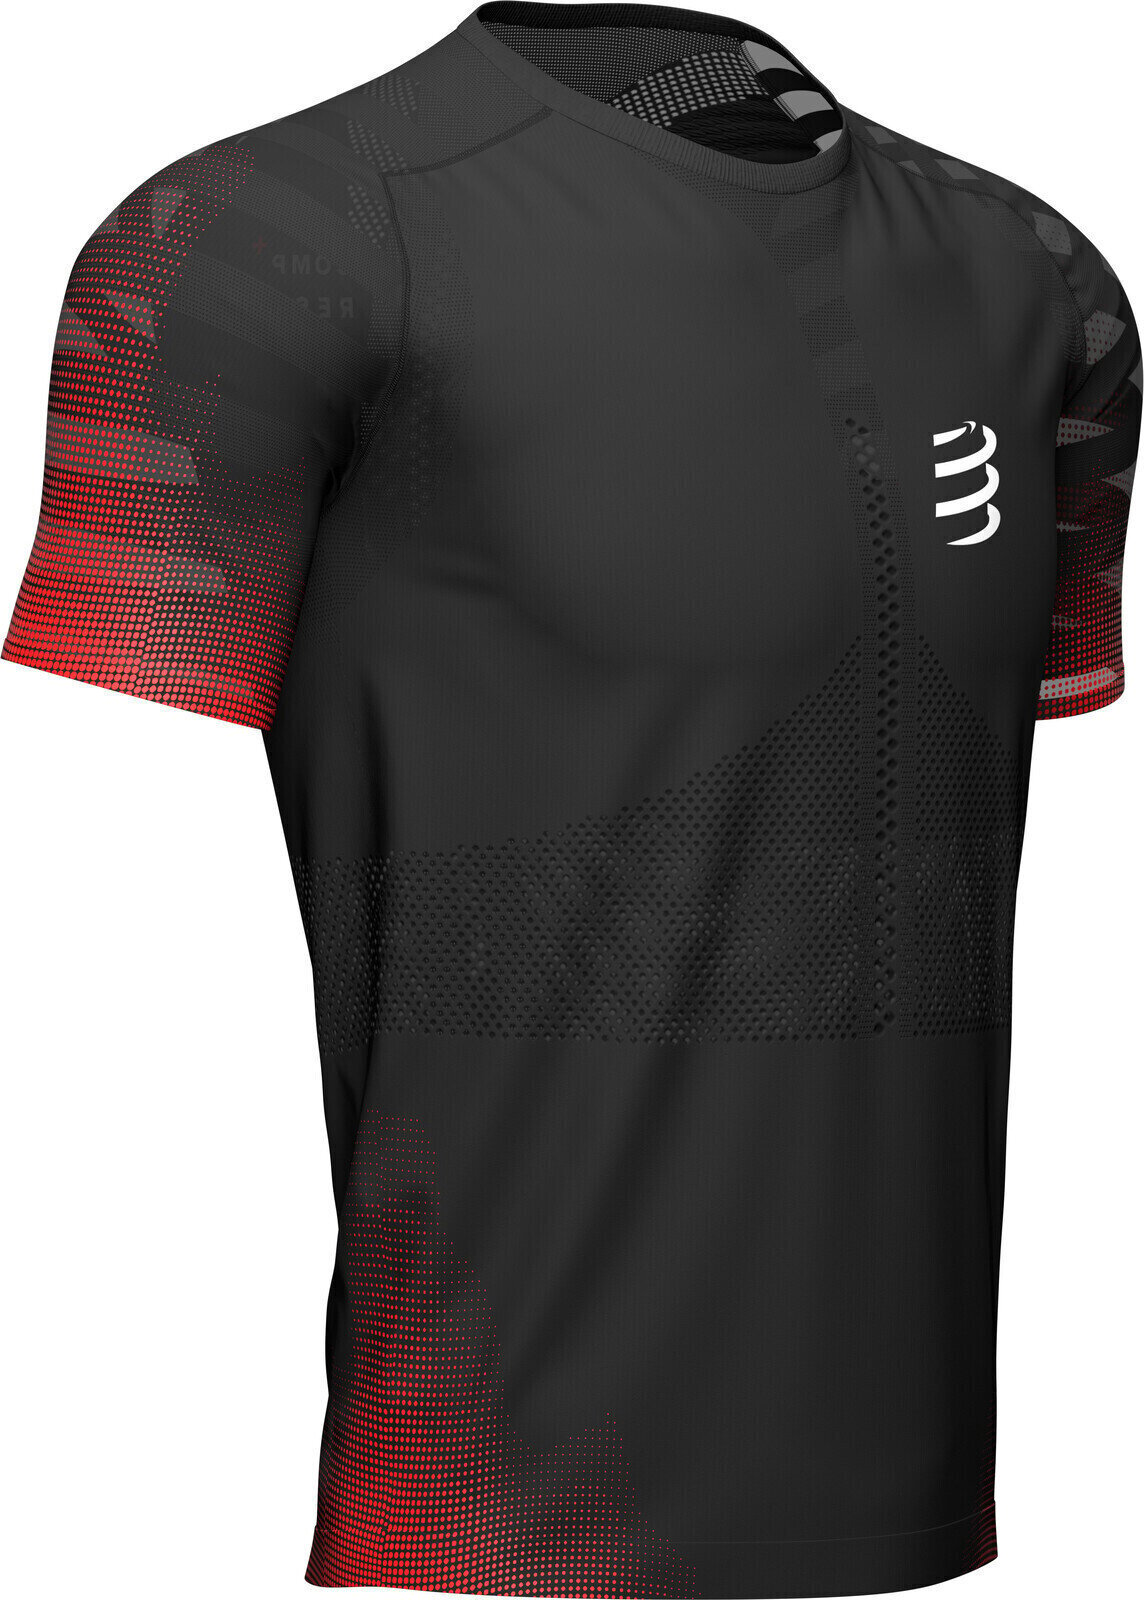 Running t-shirt with short sleeves
 Compressport Racing SS T-Shirt Black S Running t-shirt with short sleeves